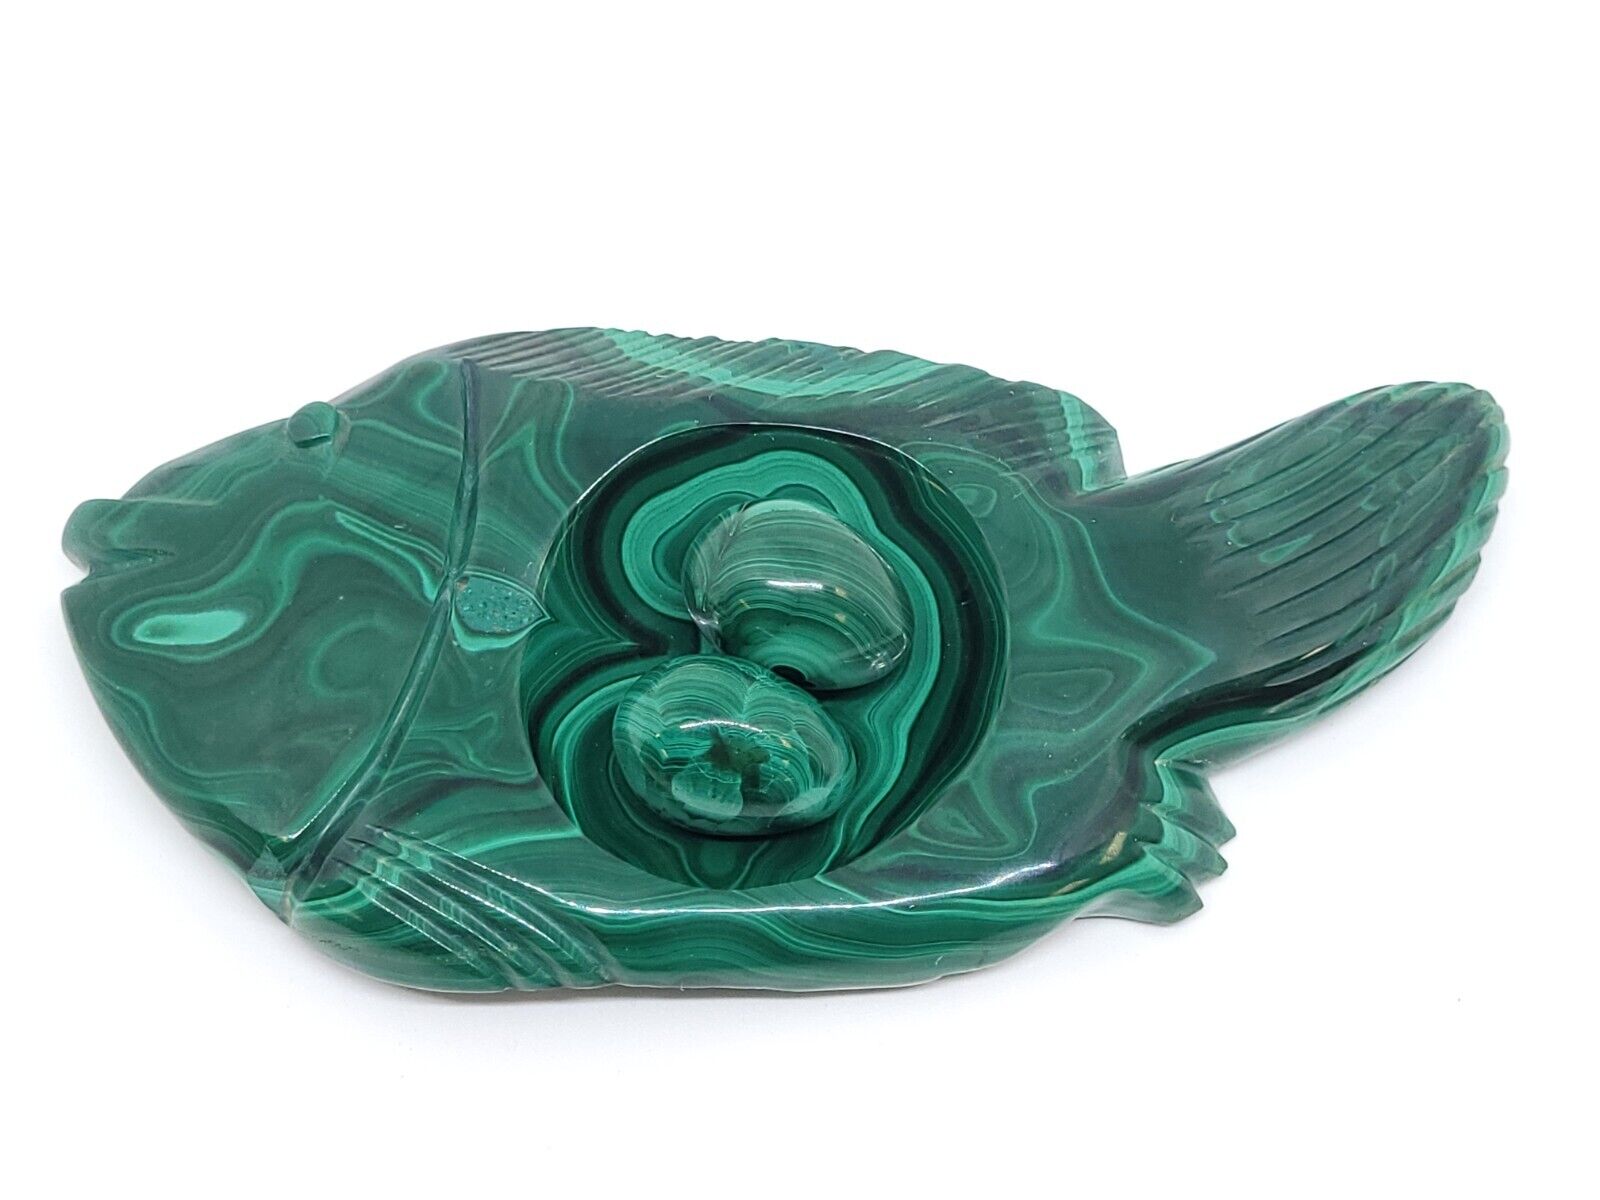 Hand Carved Malachite Fish Dish Sculpture ( 7.5 inch long)With 2 eggs, OOAK